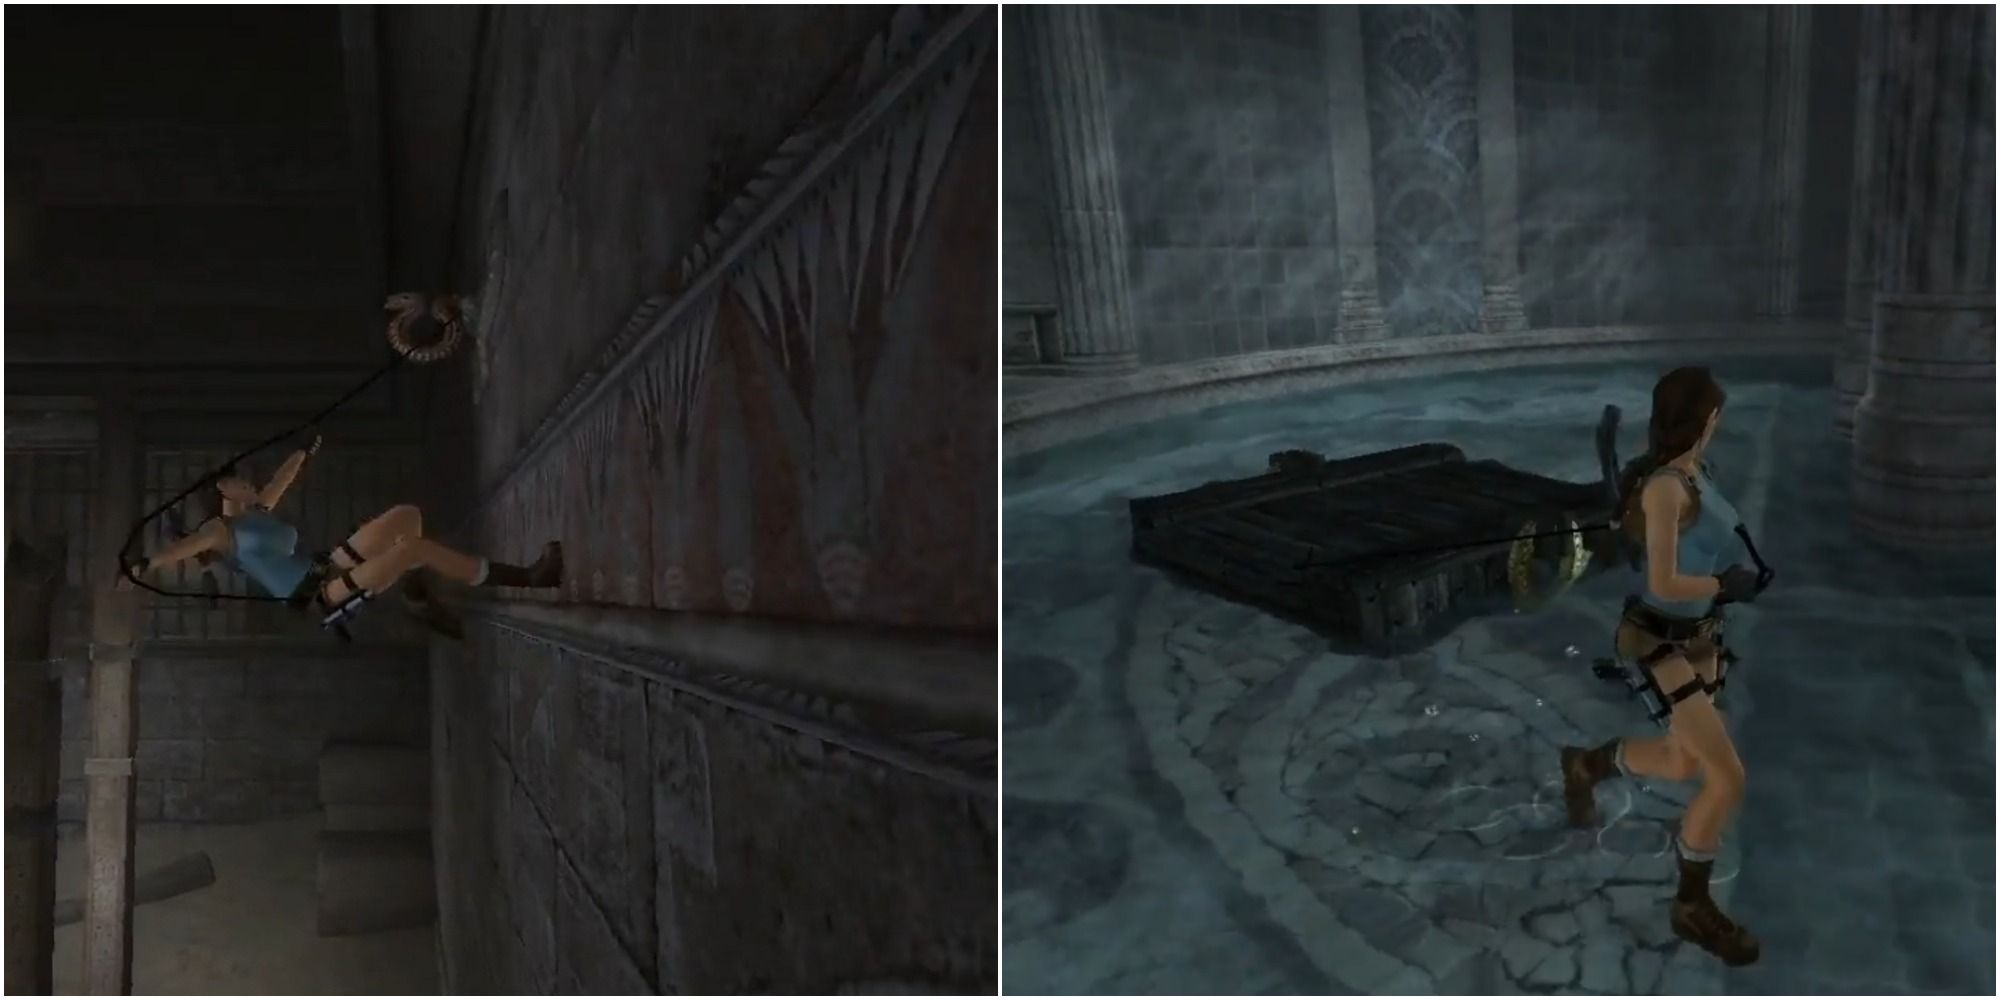 Lara Croft uses her grapple wisely in Tomb Raider Anniversary